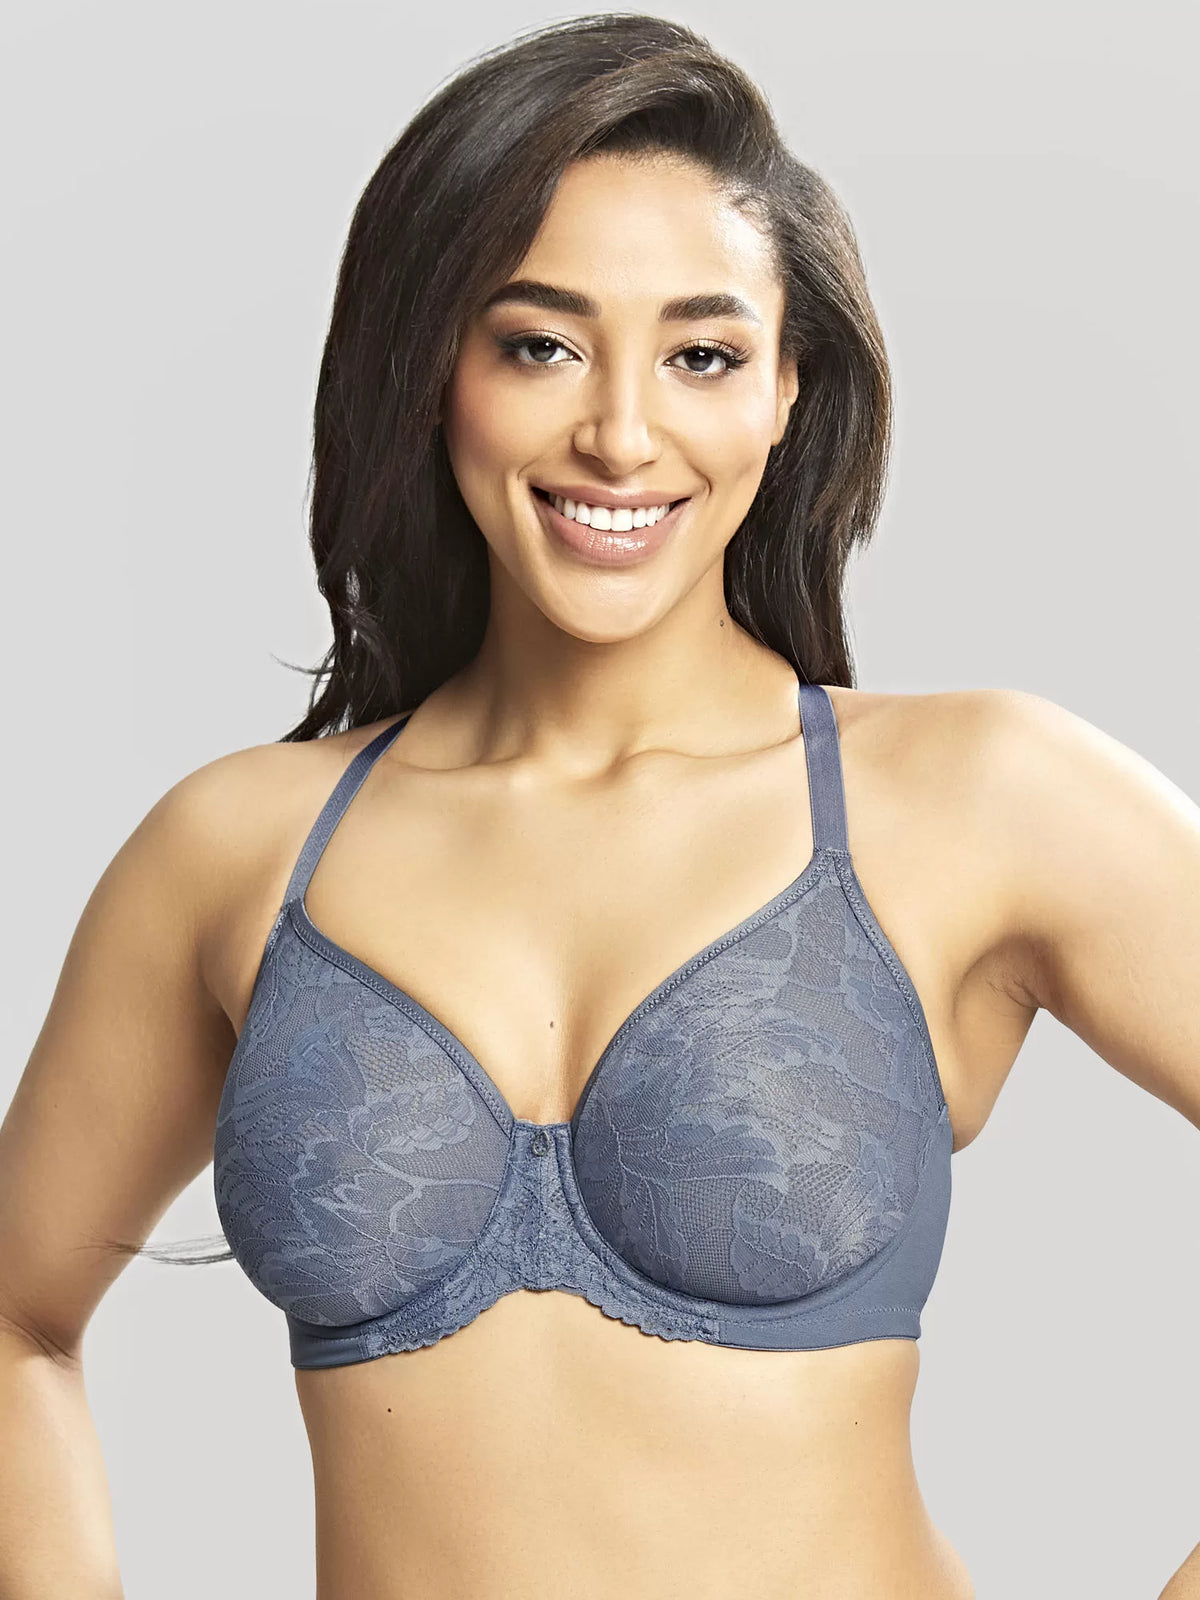 Radiance Full-Cup Molded Underwire bra from Panache at Belle Lacet Lingerie, Phoenix-Gilbert